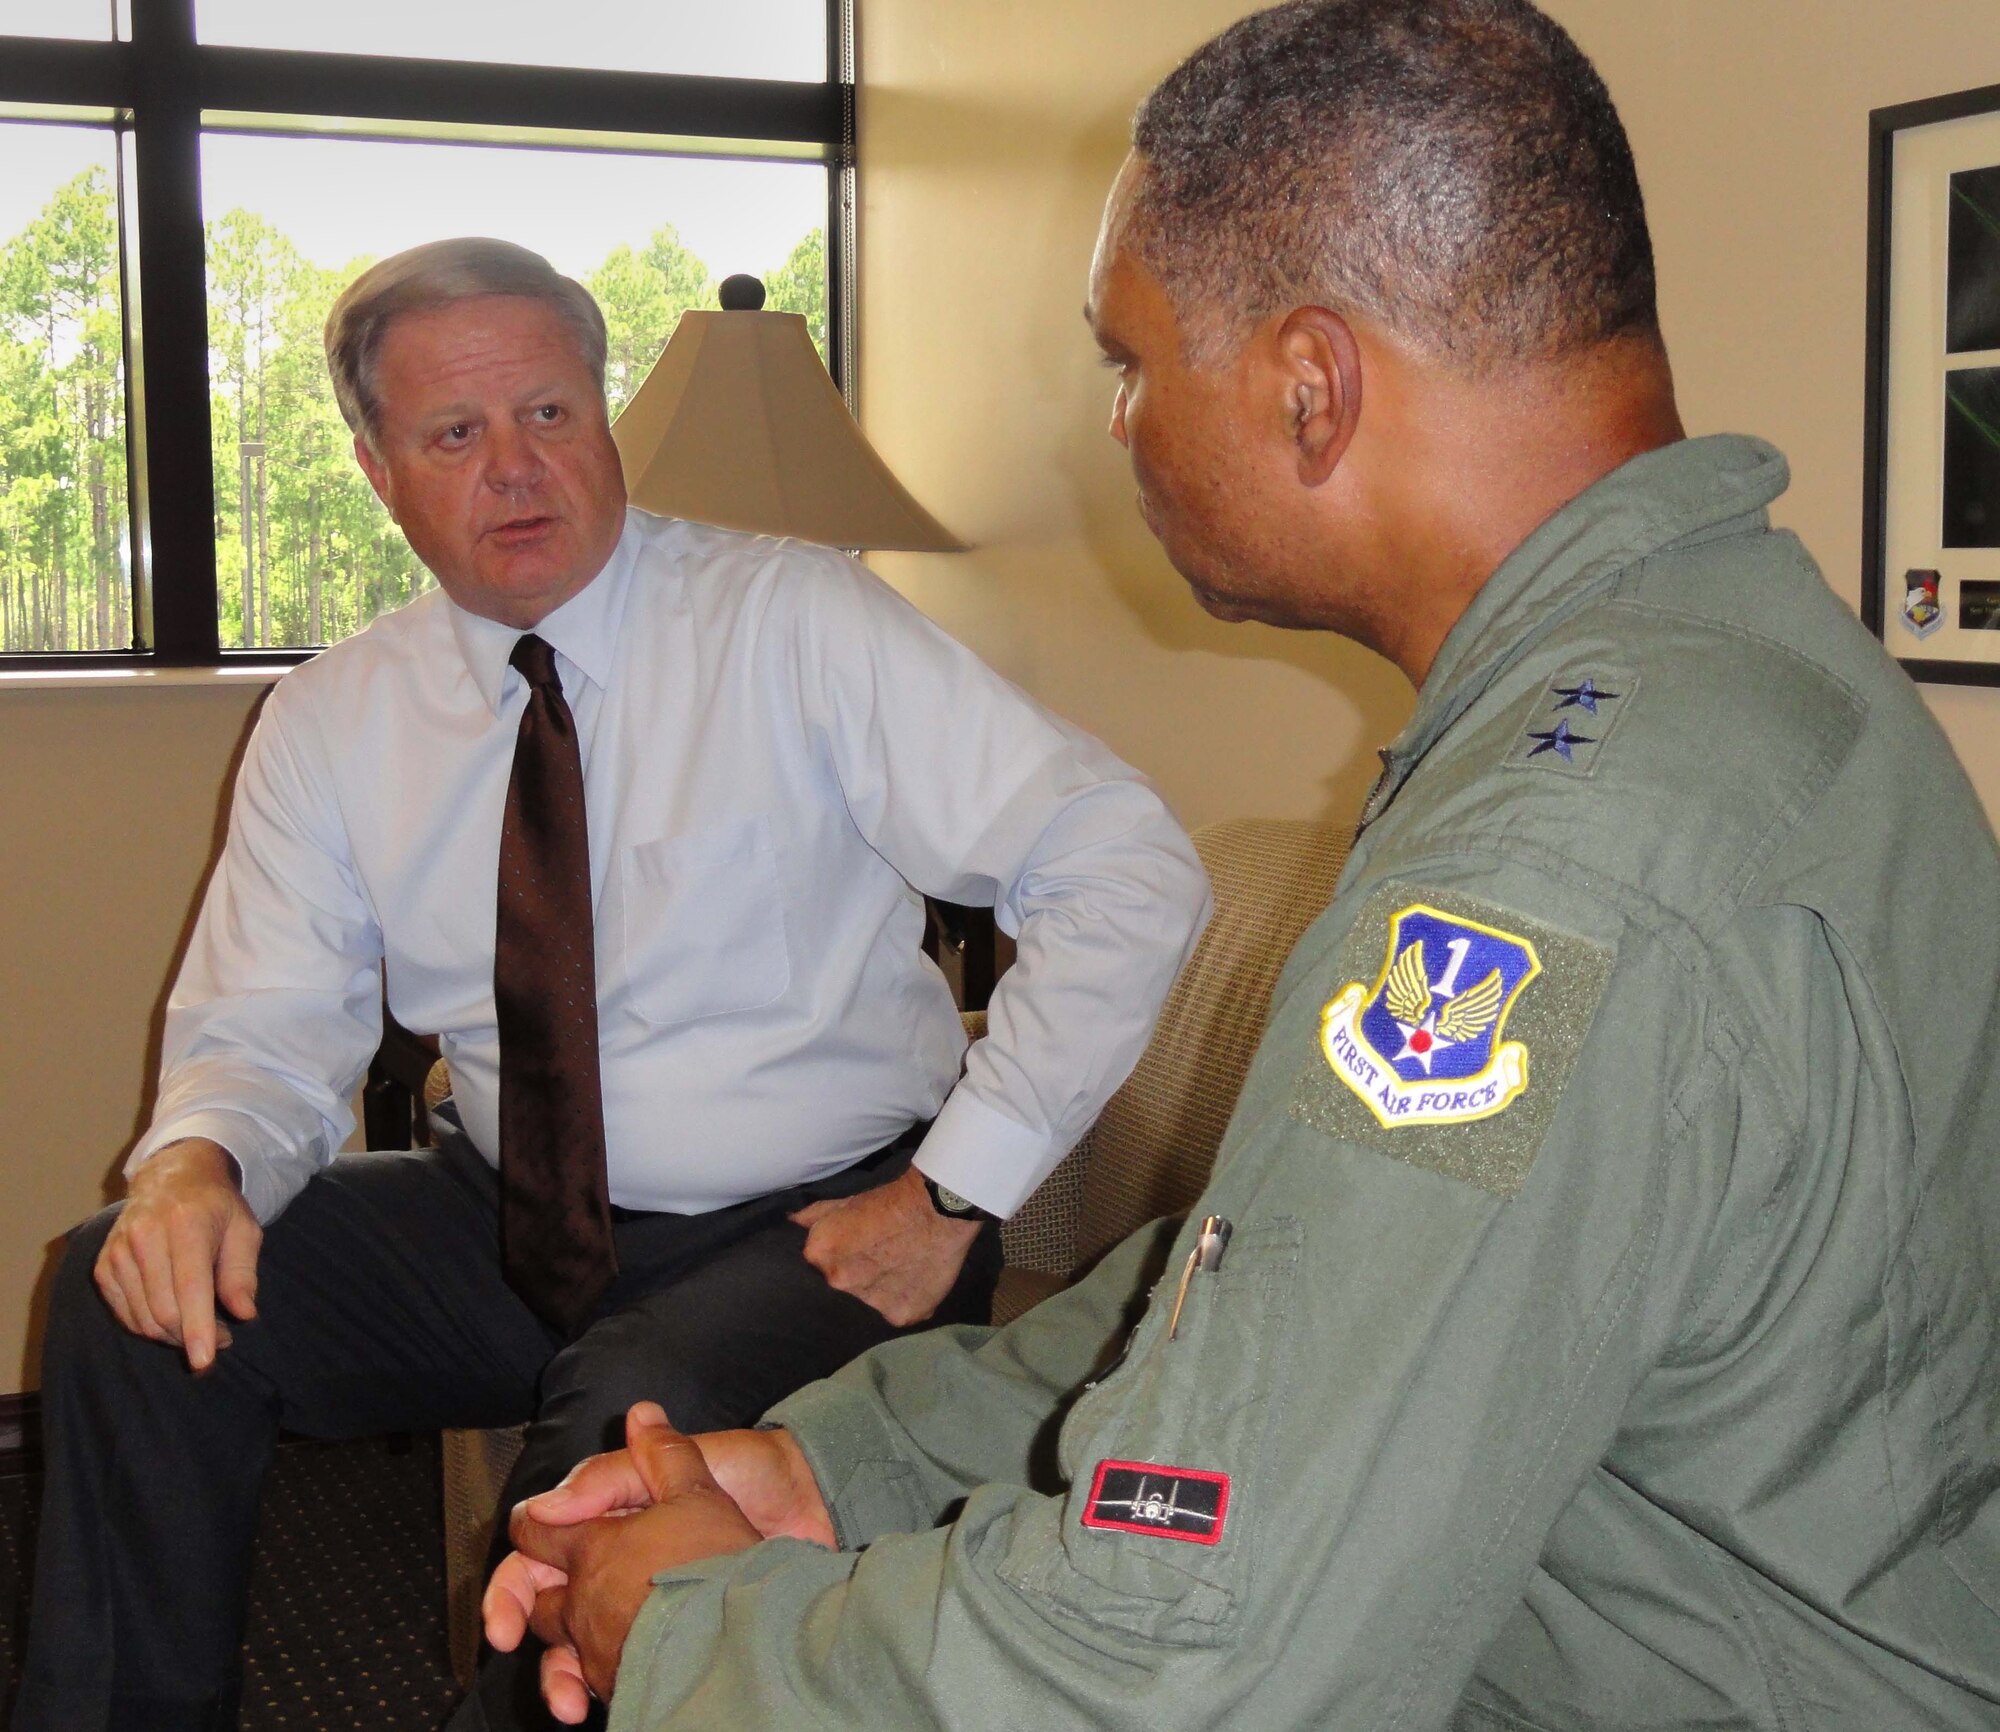 Gary Larson, left, political advisor for Air Forces Northern, discusses foreign policy issues with Maj. Gen. Garry C. Dean, AFNORTH commander. Larson was chosen to serve as the first POLAD at AFNORTH after the Departments of Defense and State realized how large the command’s international mission had become. (U.S. Air Force photo by Angela Pope)